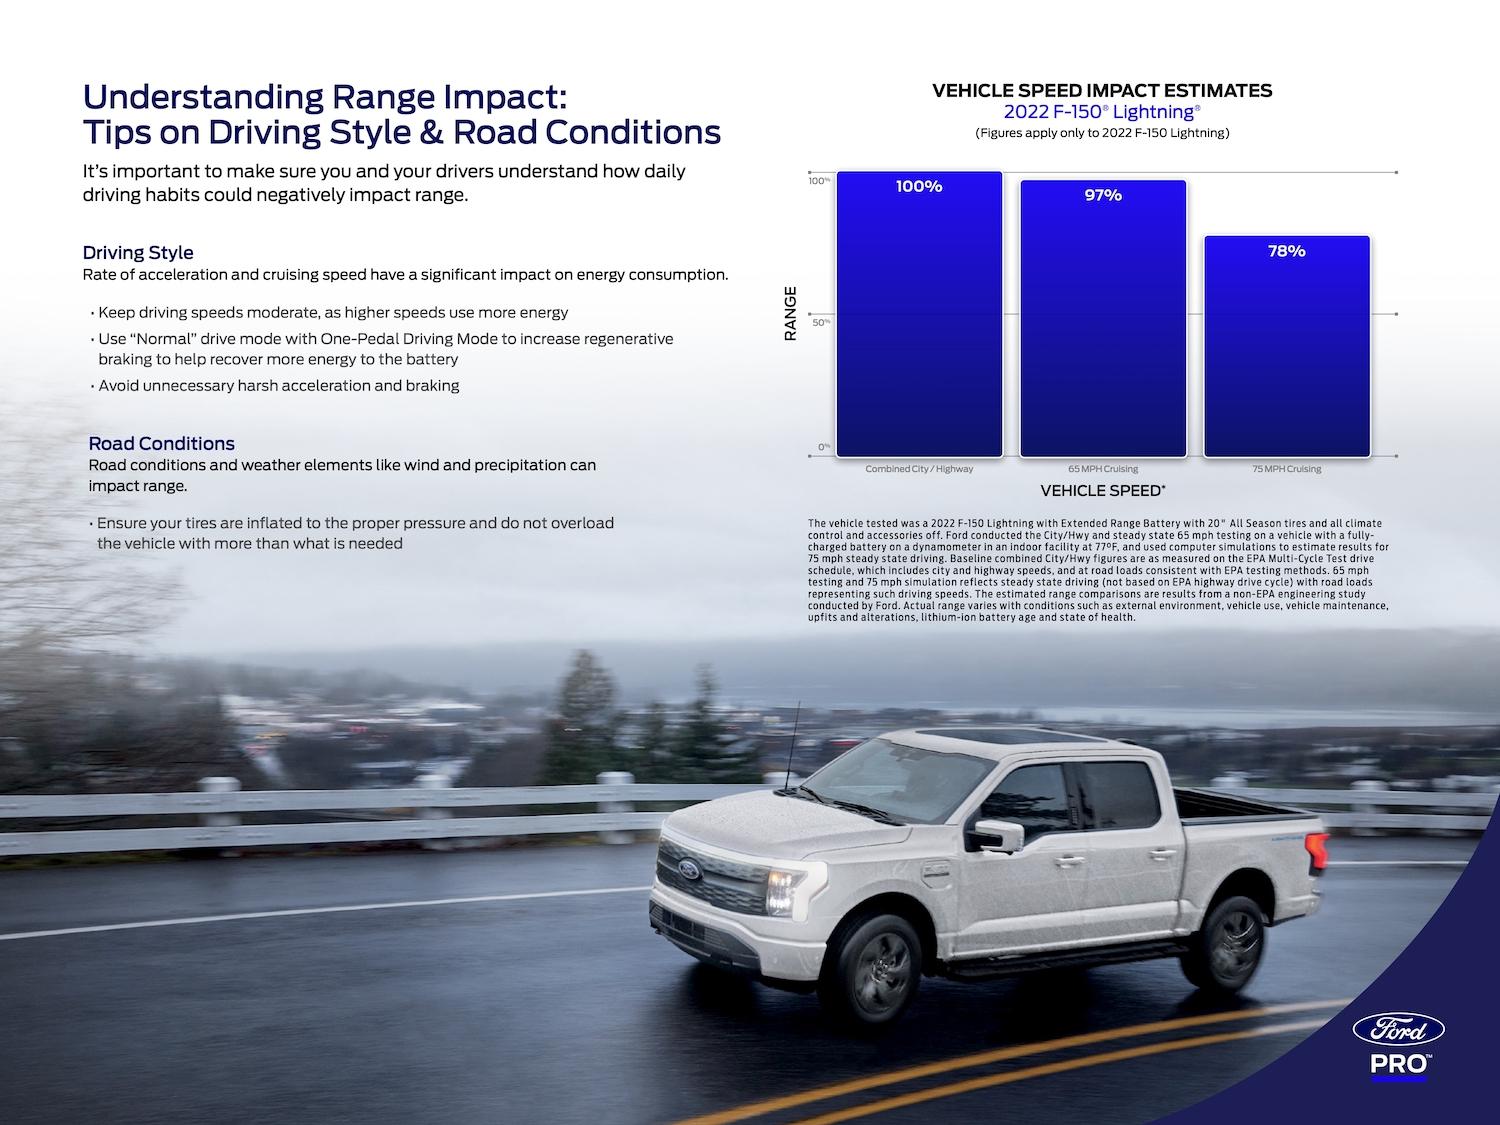 Ford F-150 Lightning Tips to Maximize Your F-150 Lightning Electric Range (Preconditioning, Hauling/Towing, Driving Tools) Ford_Pro_F150_Lightning_Guide_page_08